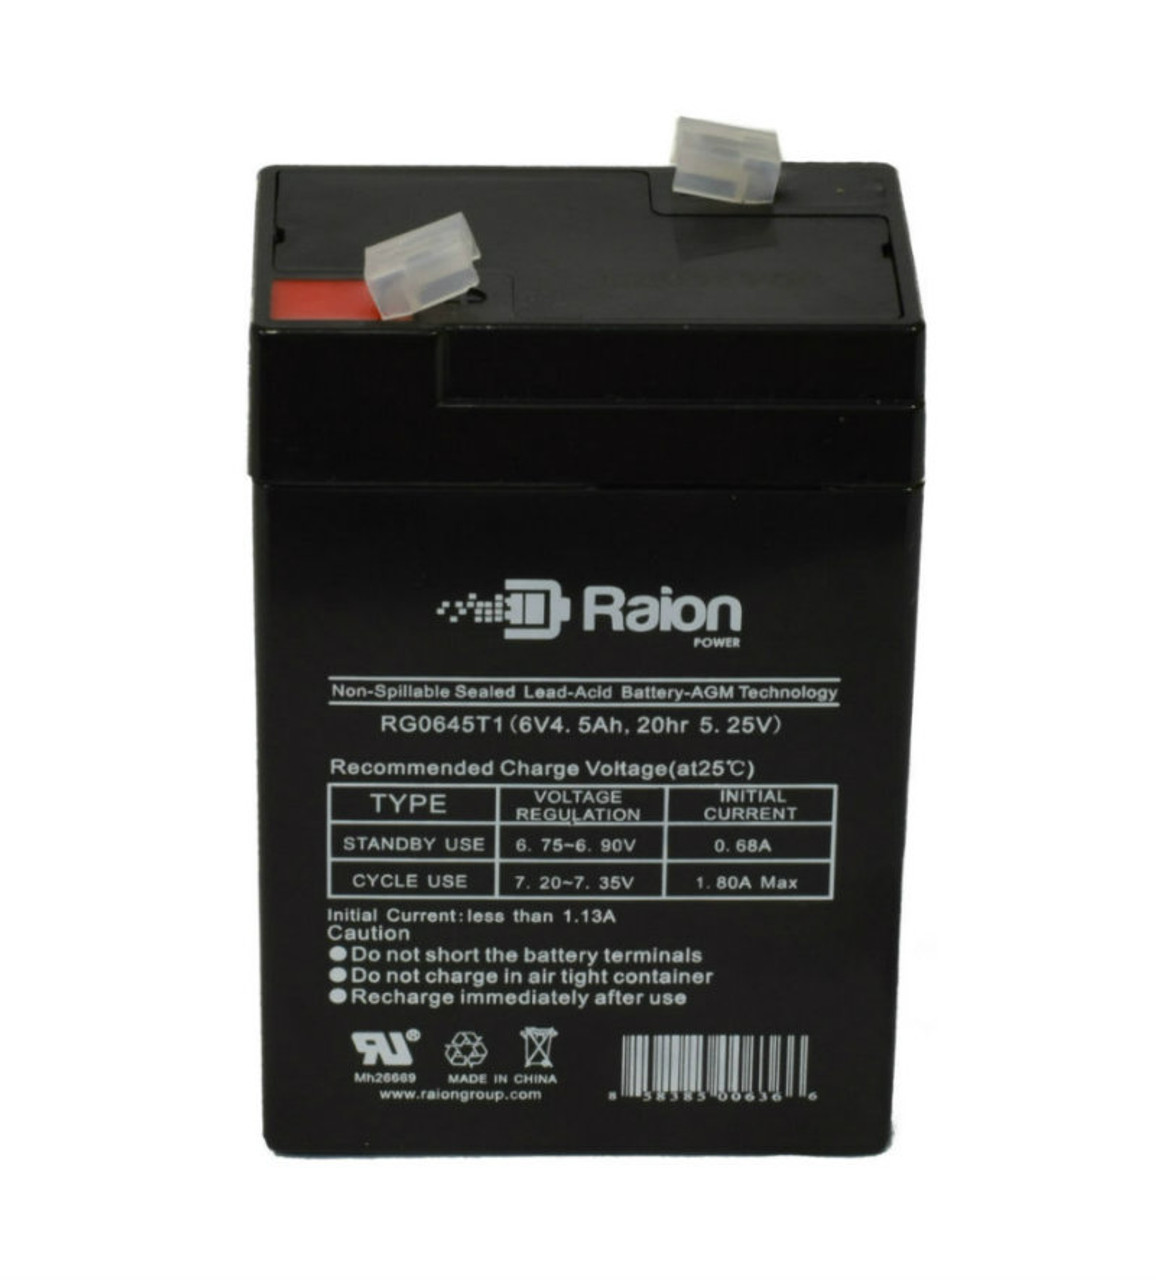 Raion Power RG0645T1 Replacement Battery Cartridge for Chloride 6V4.5AH